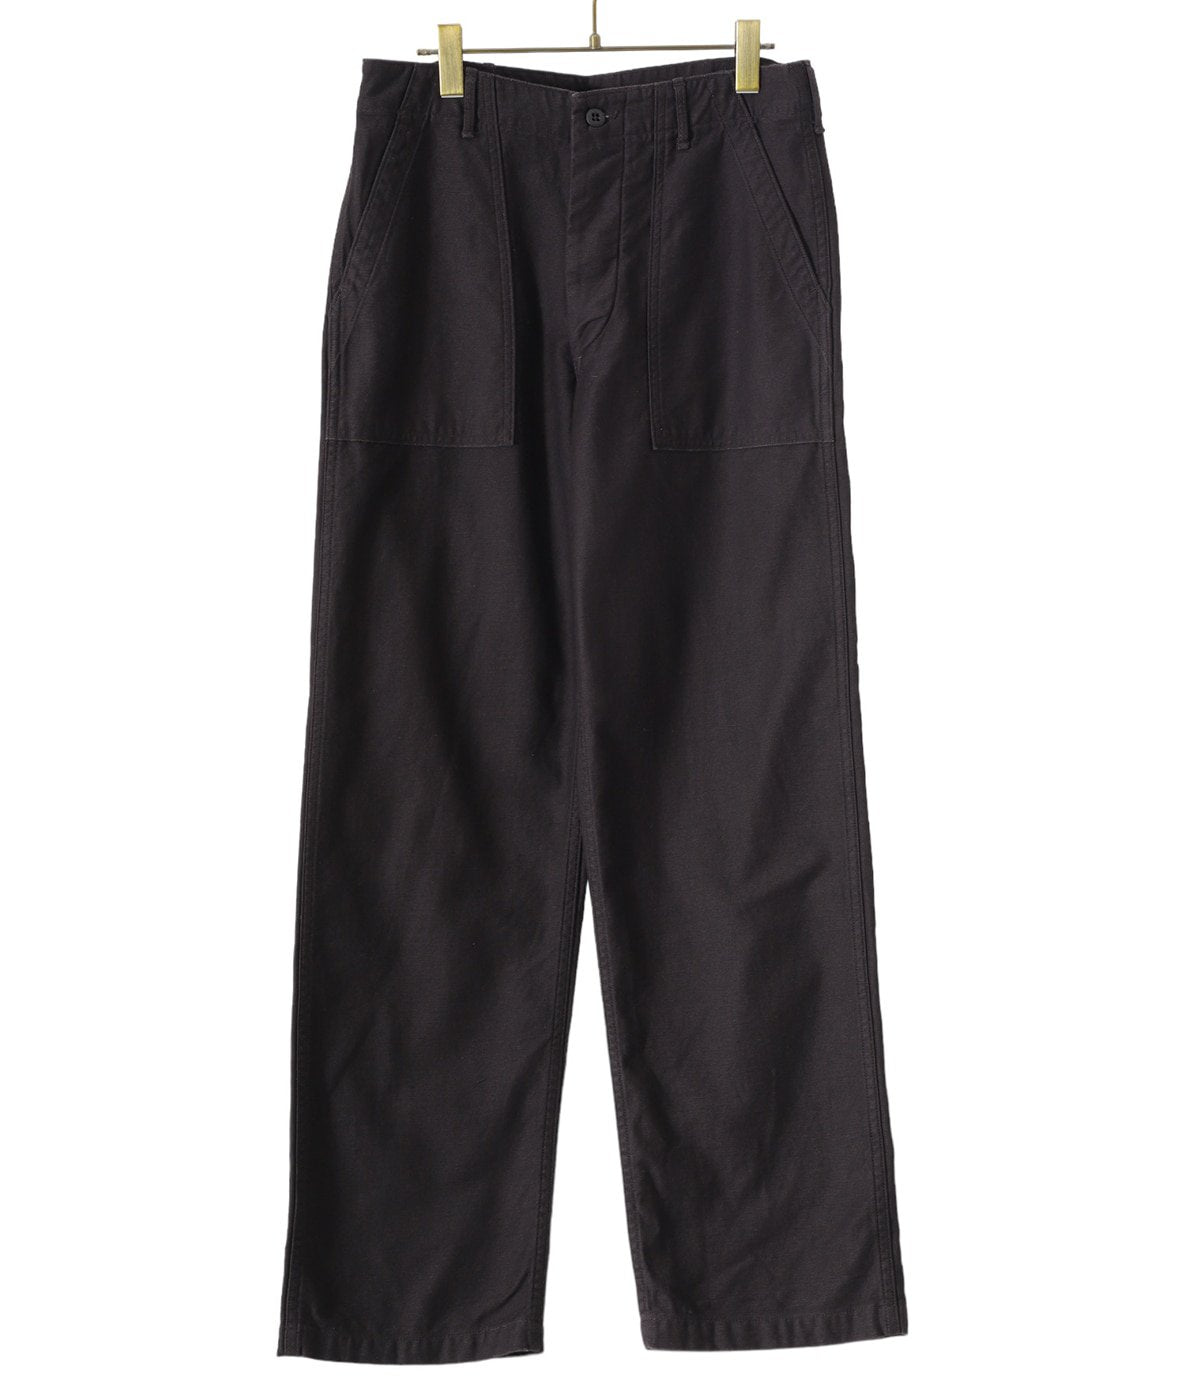 orSlow US ARMY FATIGUE PANTS (Black) – unexpected store